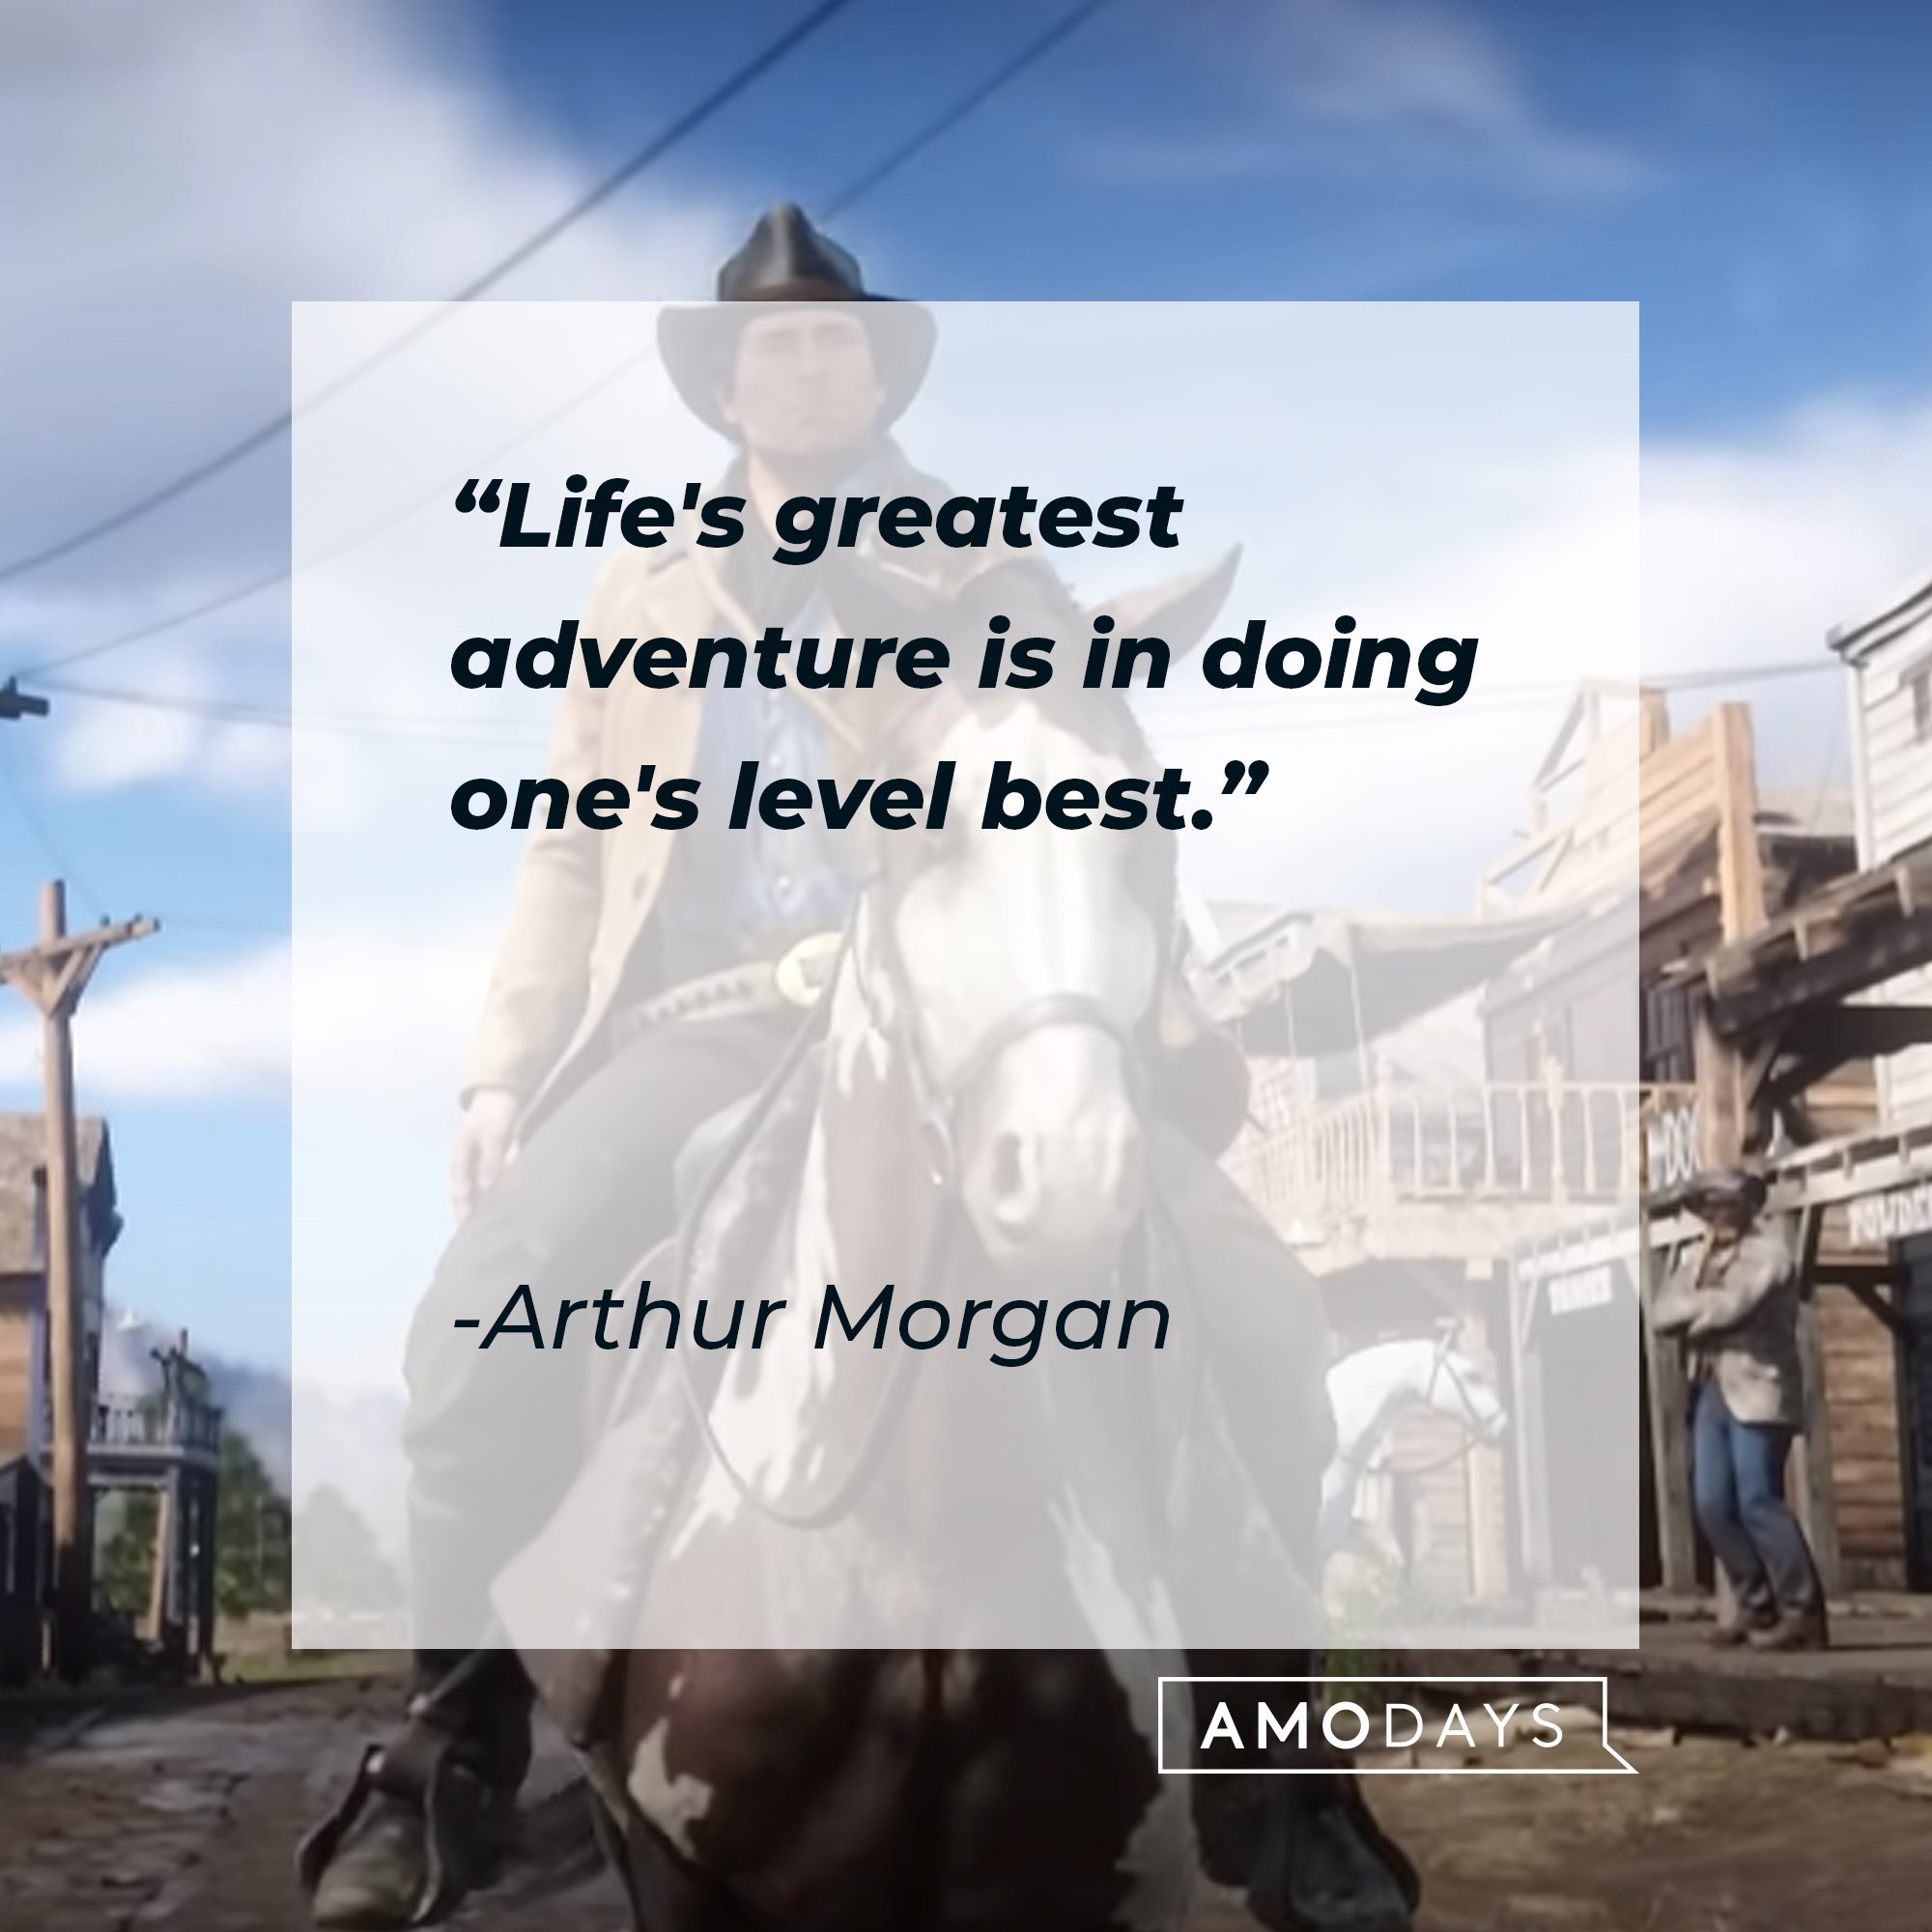 Arthur Morgan's quote: "Life's greatest adventure is in doing one's level best." | Image: AmoDays